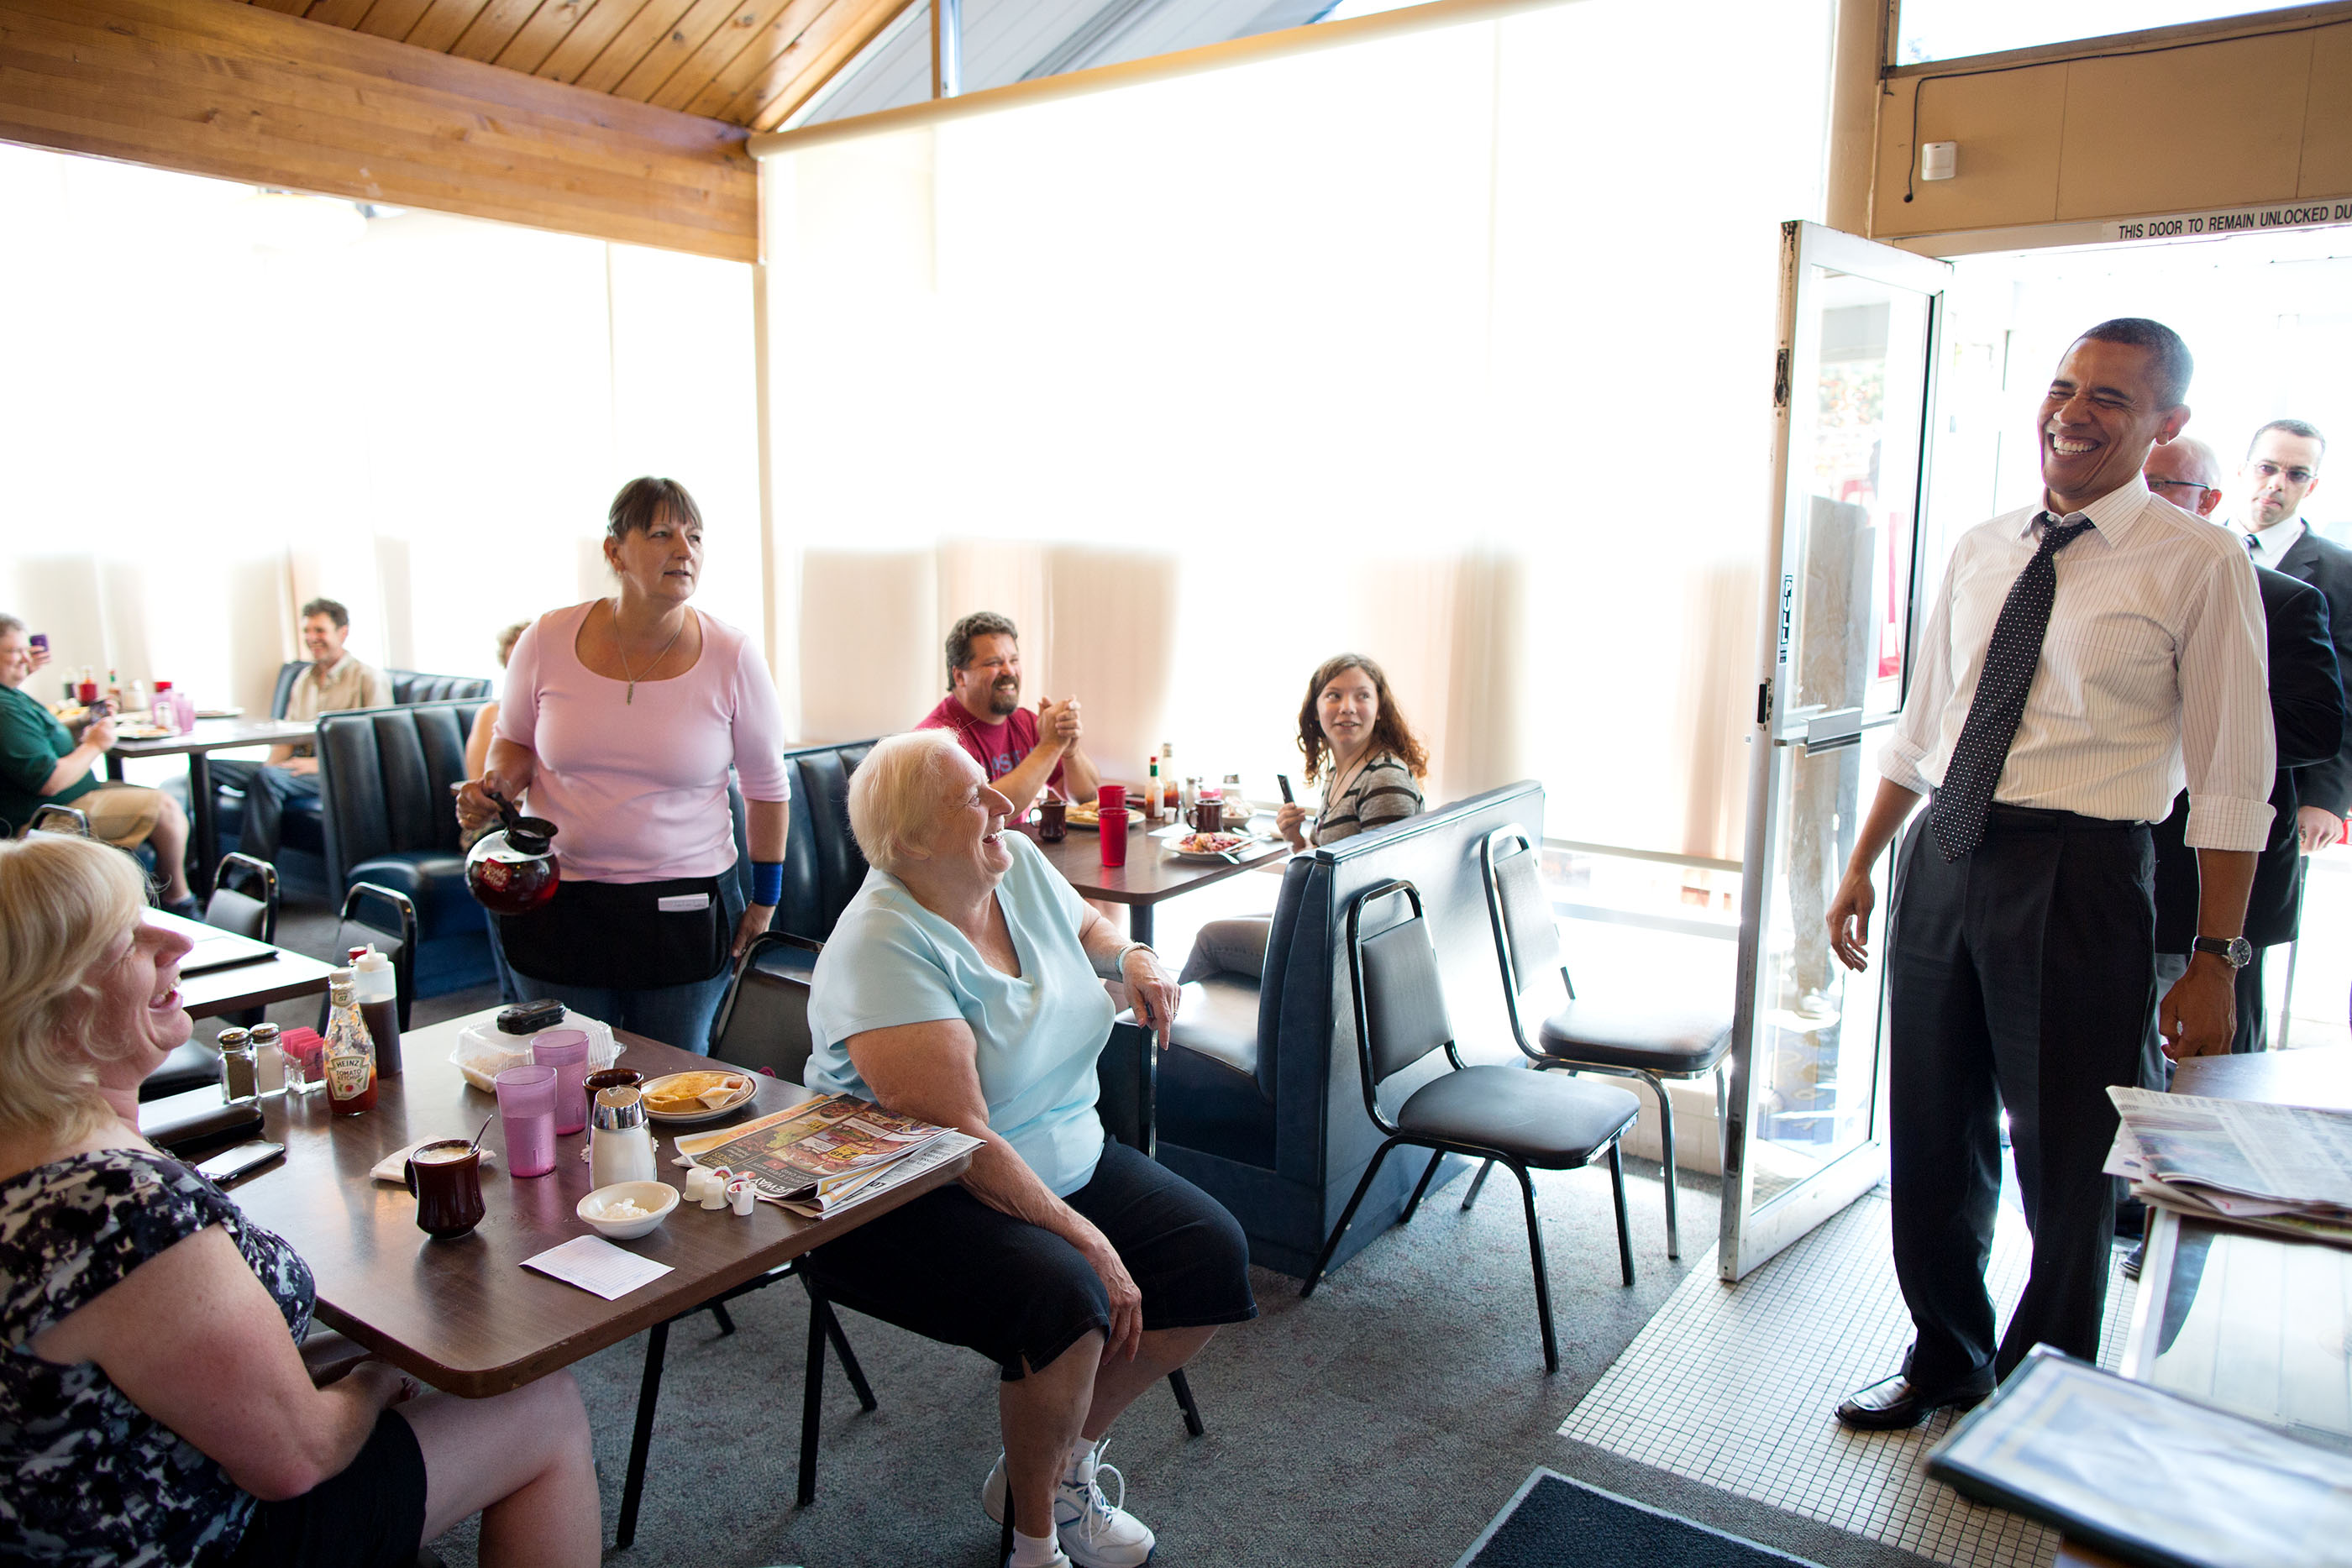 Oregon, July 24, 2012. Reacting to a quip from a patron at the Gateway Breakfast House in Portland. (Official White House Photo by Pete Souza)